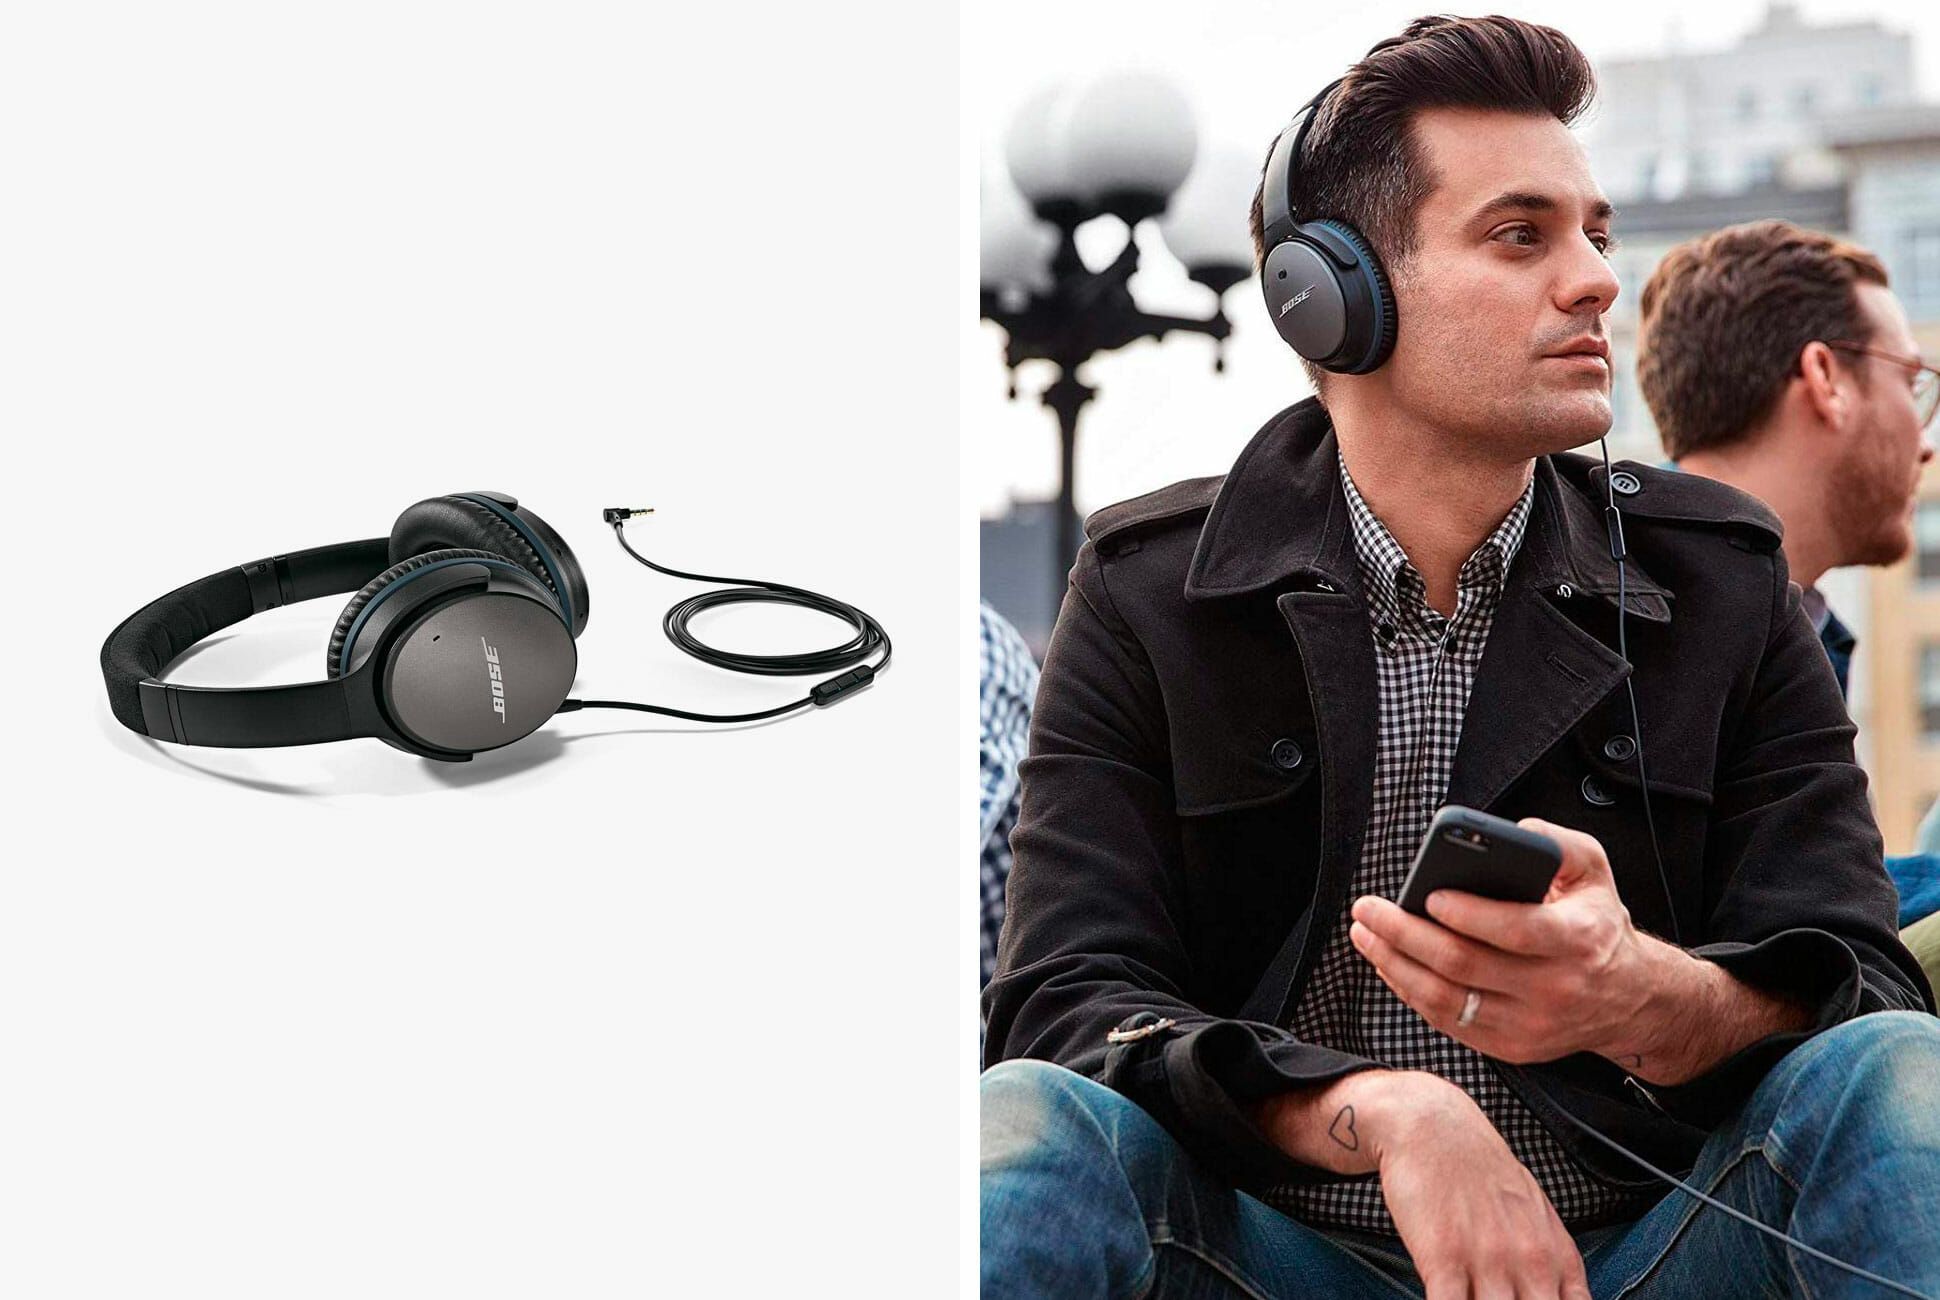 Advarsel Forge Shipley Bose's Old School Noise-Canceling Headphones Are Just $129